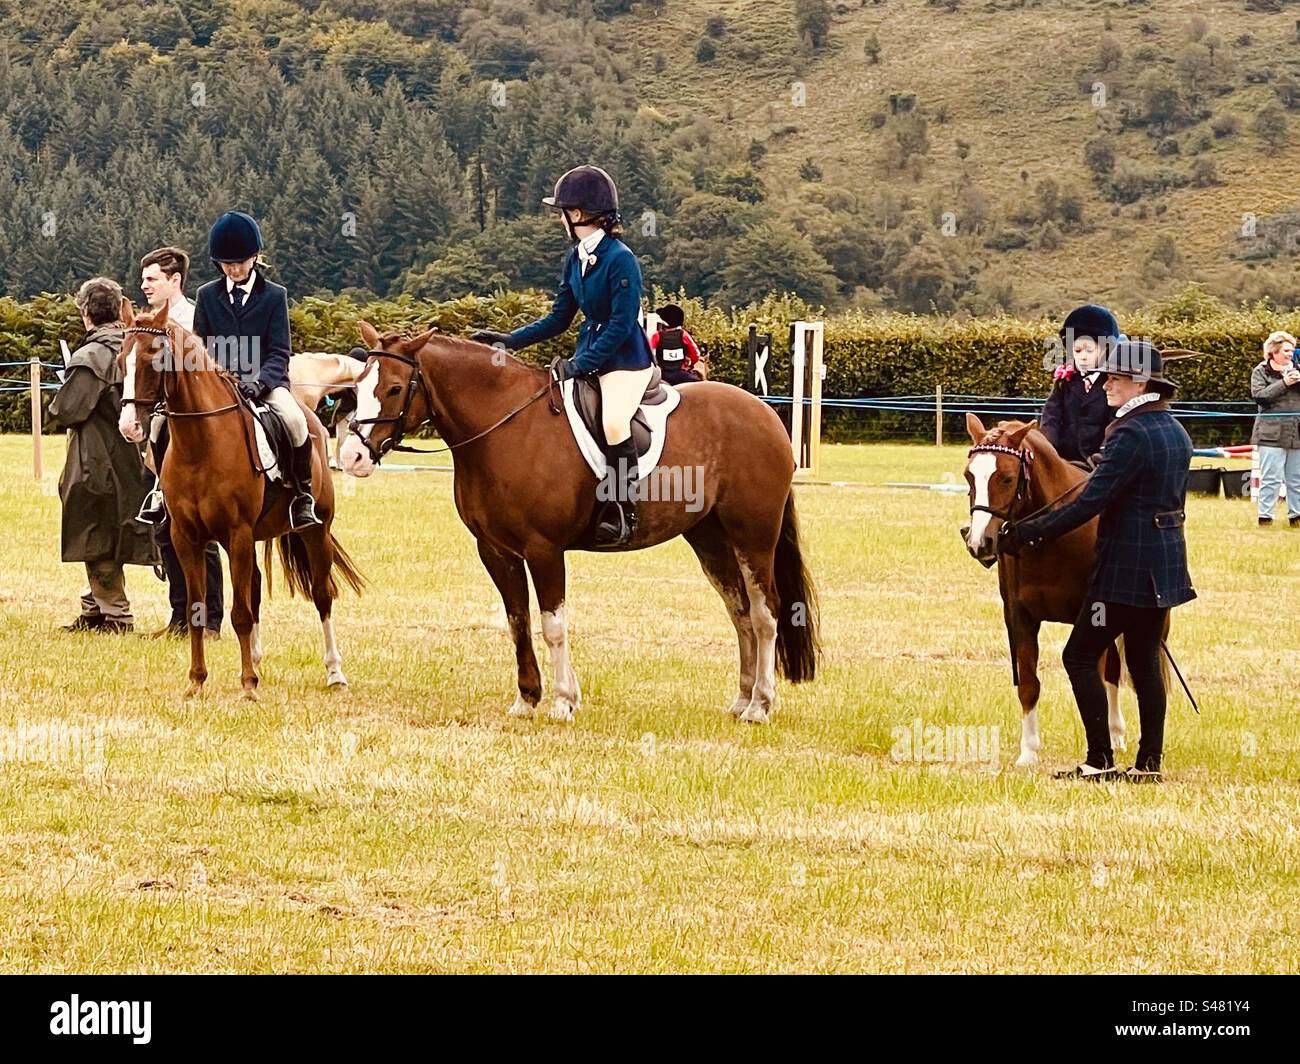 Posh English children on ponies at a countryside show Stock Photo